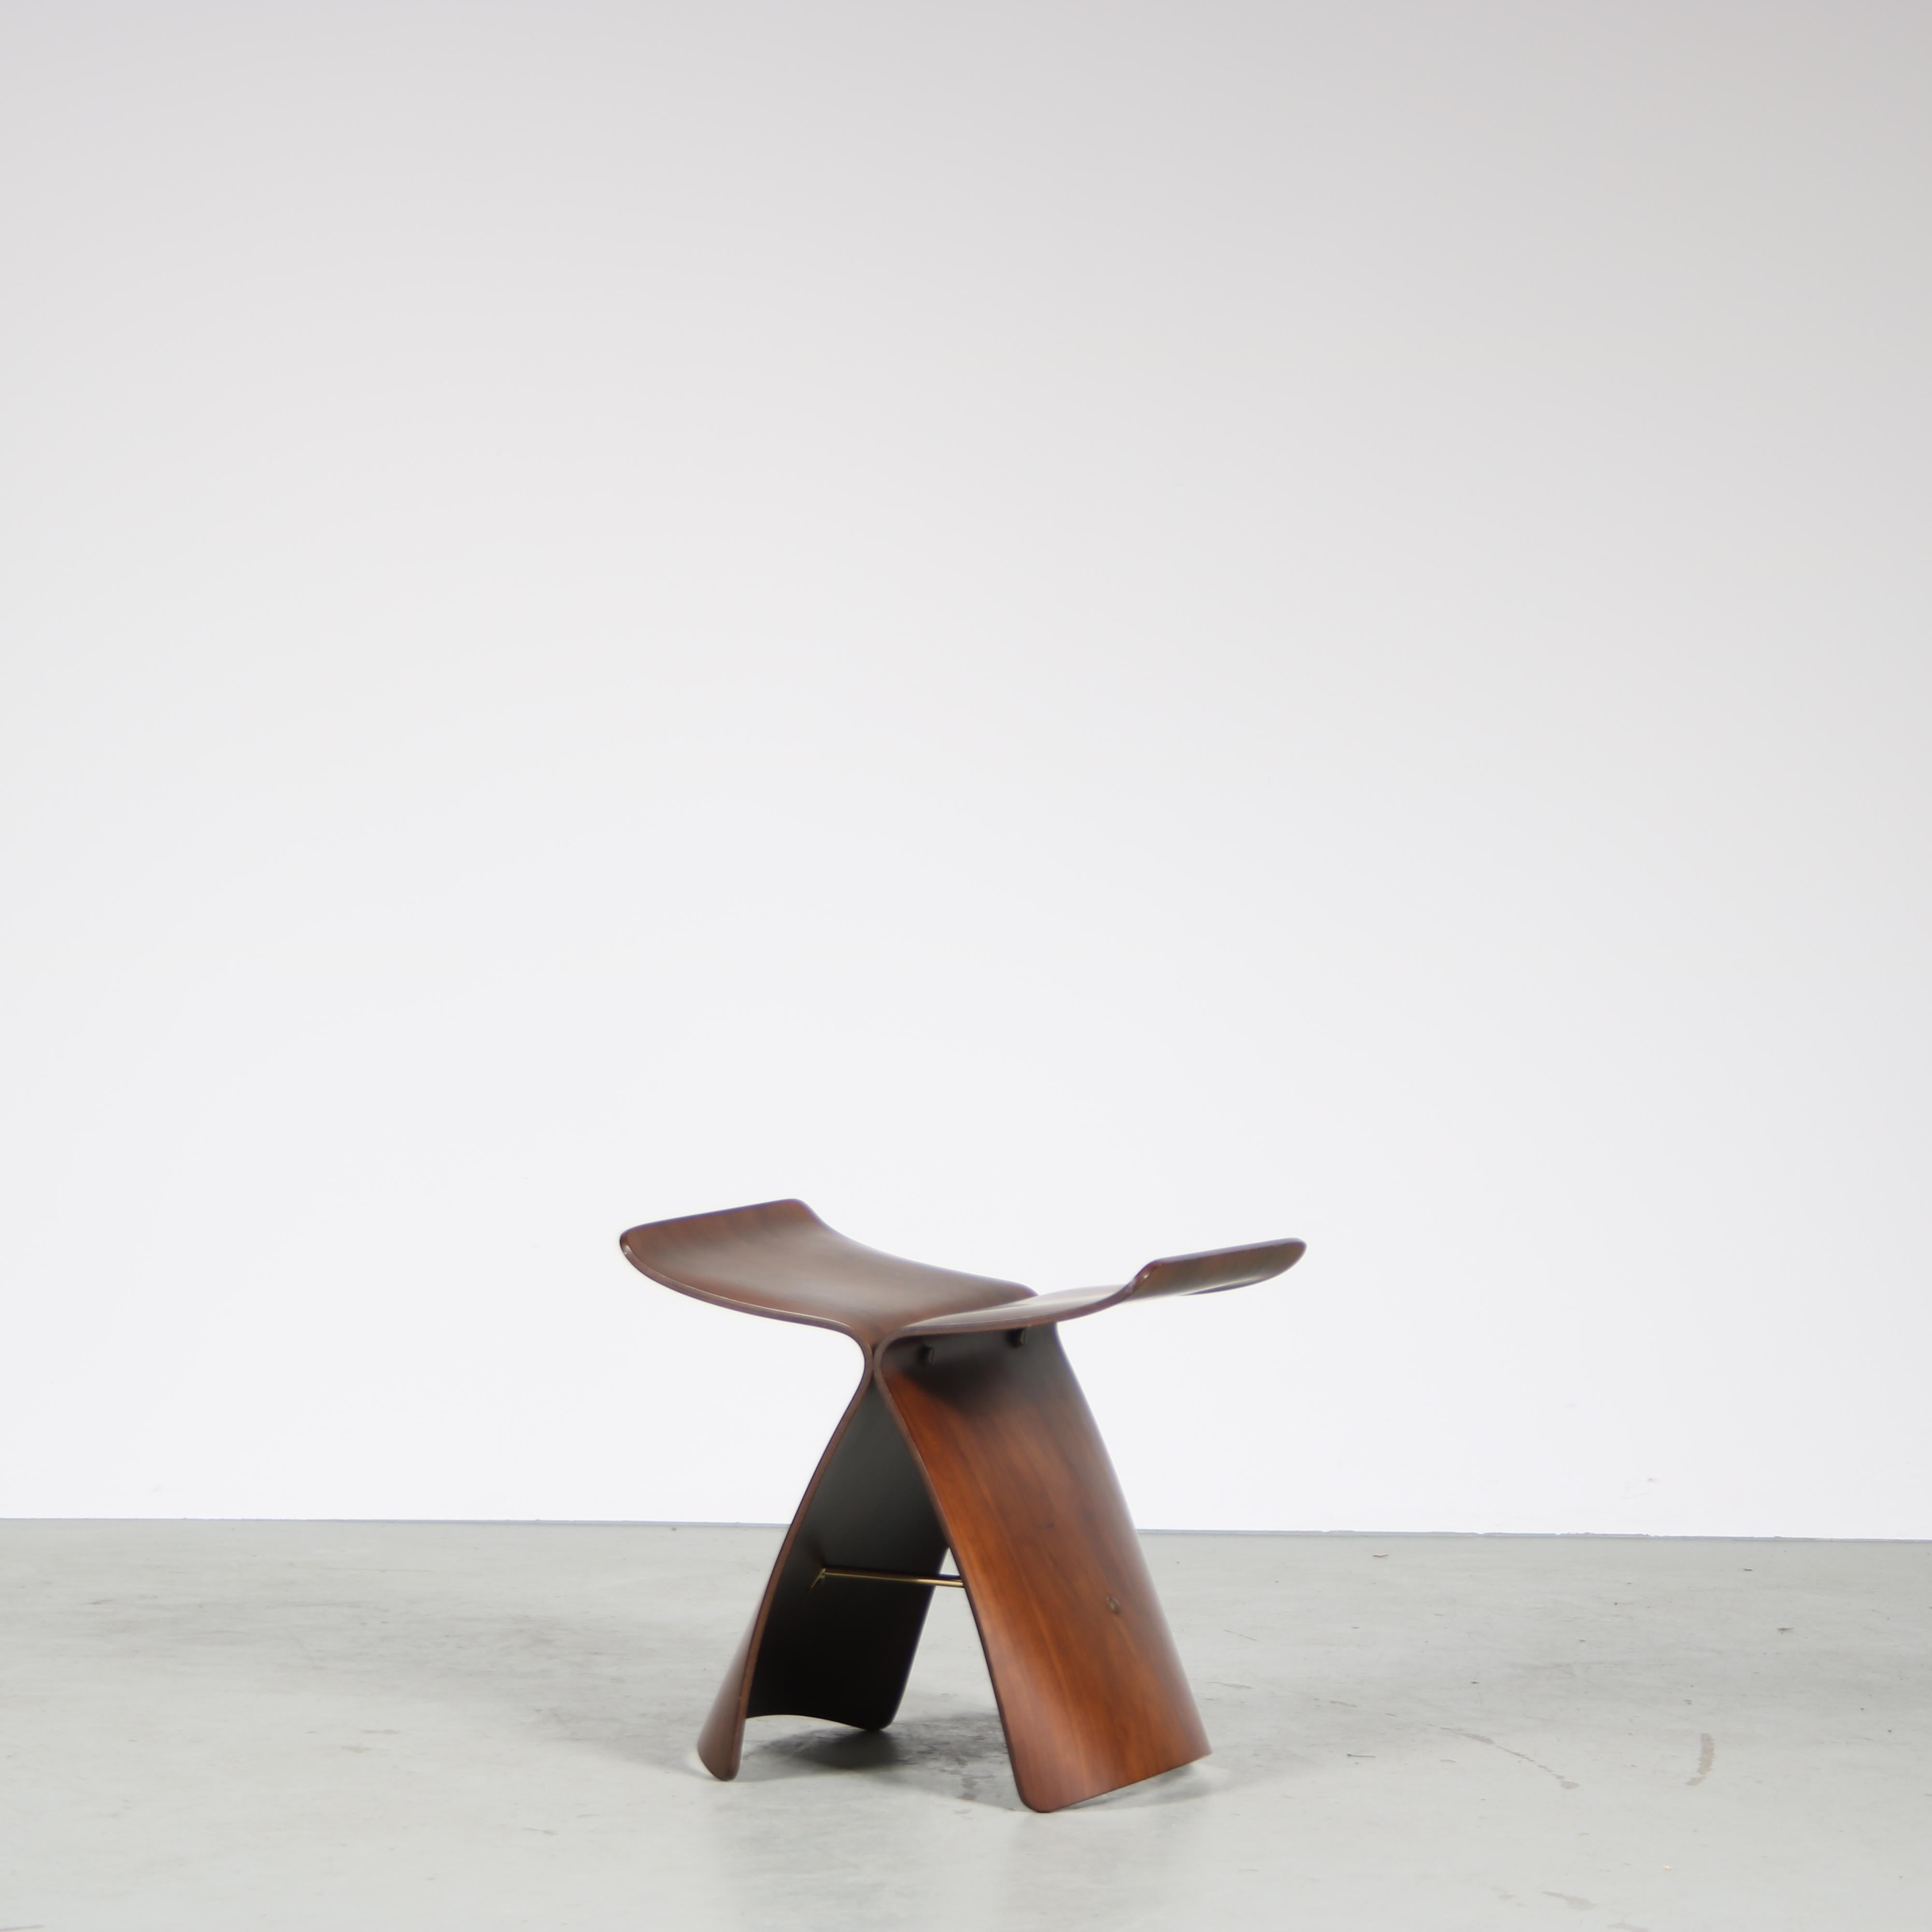 A beautiful “Butterfly” stool designed by Sori Yanagi and manufactured by Tendo in Japan around 1970.

A design classic that exudes a sense of elegance and understated beauty. Crafted from deep brown molded plywood, it’s a perfect example of the